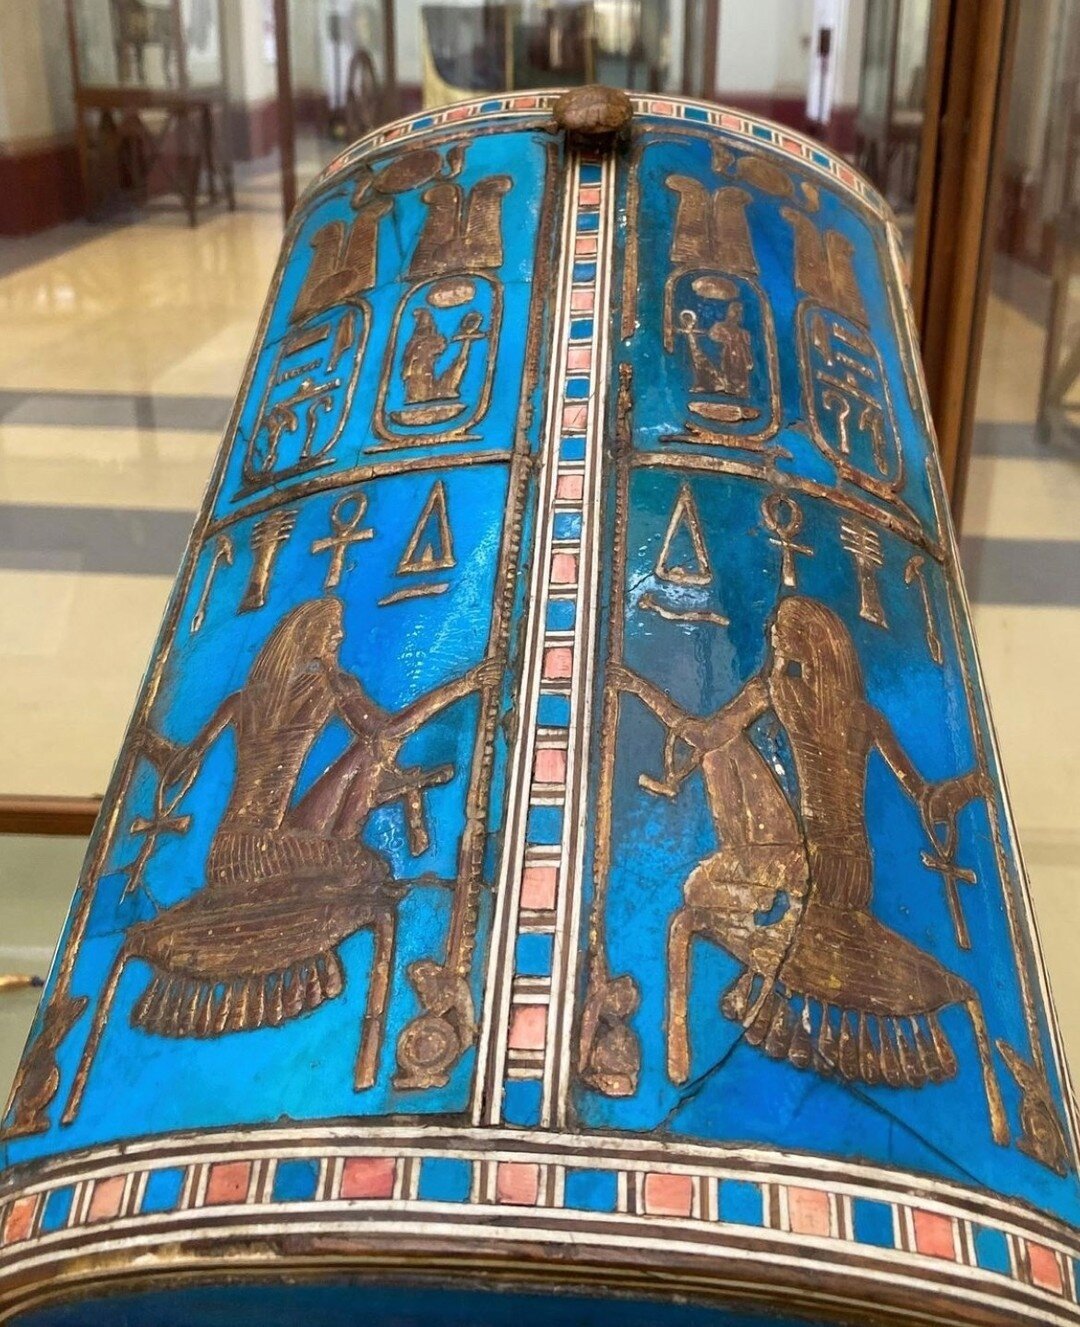 The Egyptian Museum is the oldest archaeological museum in the Middle East and houses the largest collection of Pharaonic antiquities in the world.⁠
⁠
The museum displays an extensive collection spanning from the Predynastic Period to the Greco-Roman